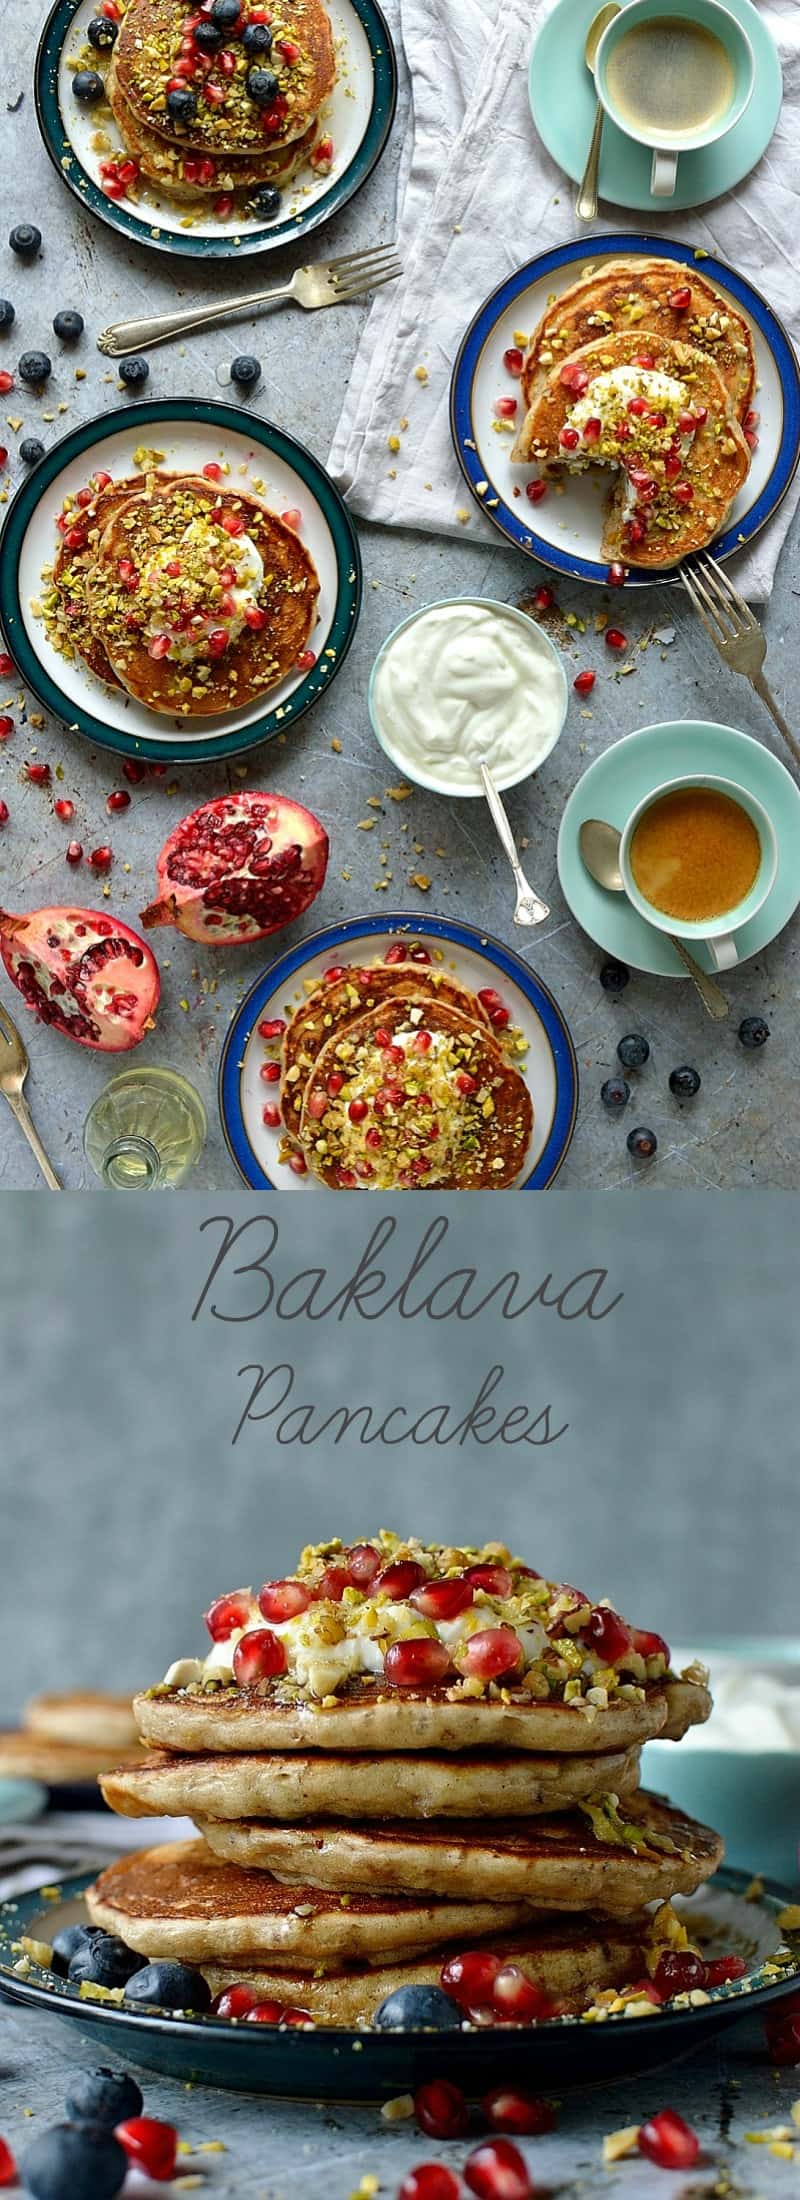 Baklava pancakes - soft, fluffy Greek yoghurt pancakes flavoured with cardamom, cinnamon and chopped pistachios, walnuts and almonds topped with a delicious honey, orange blossom, lemon and rose syrup.